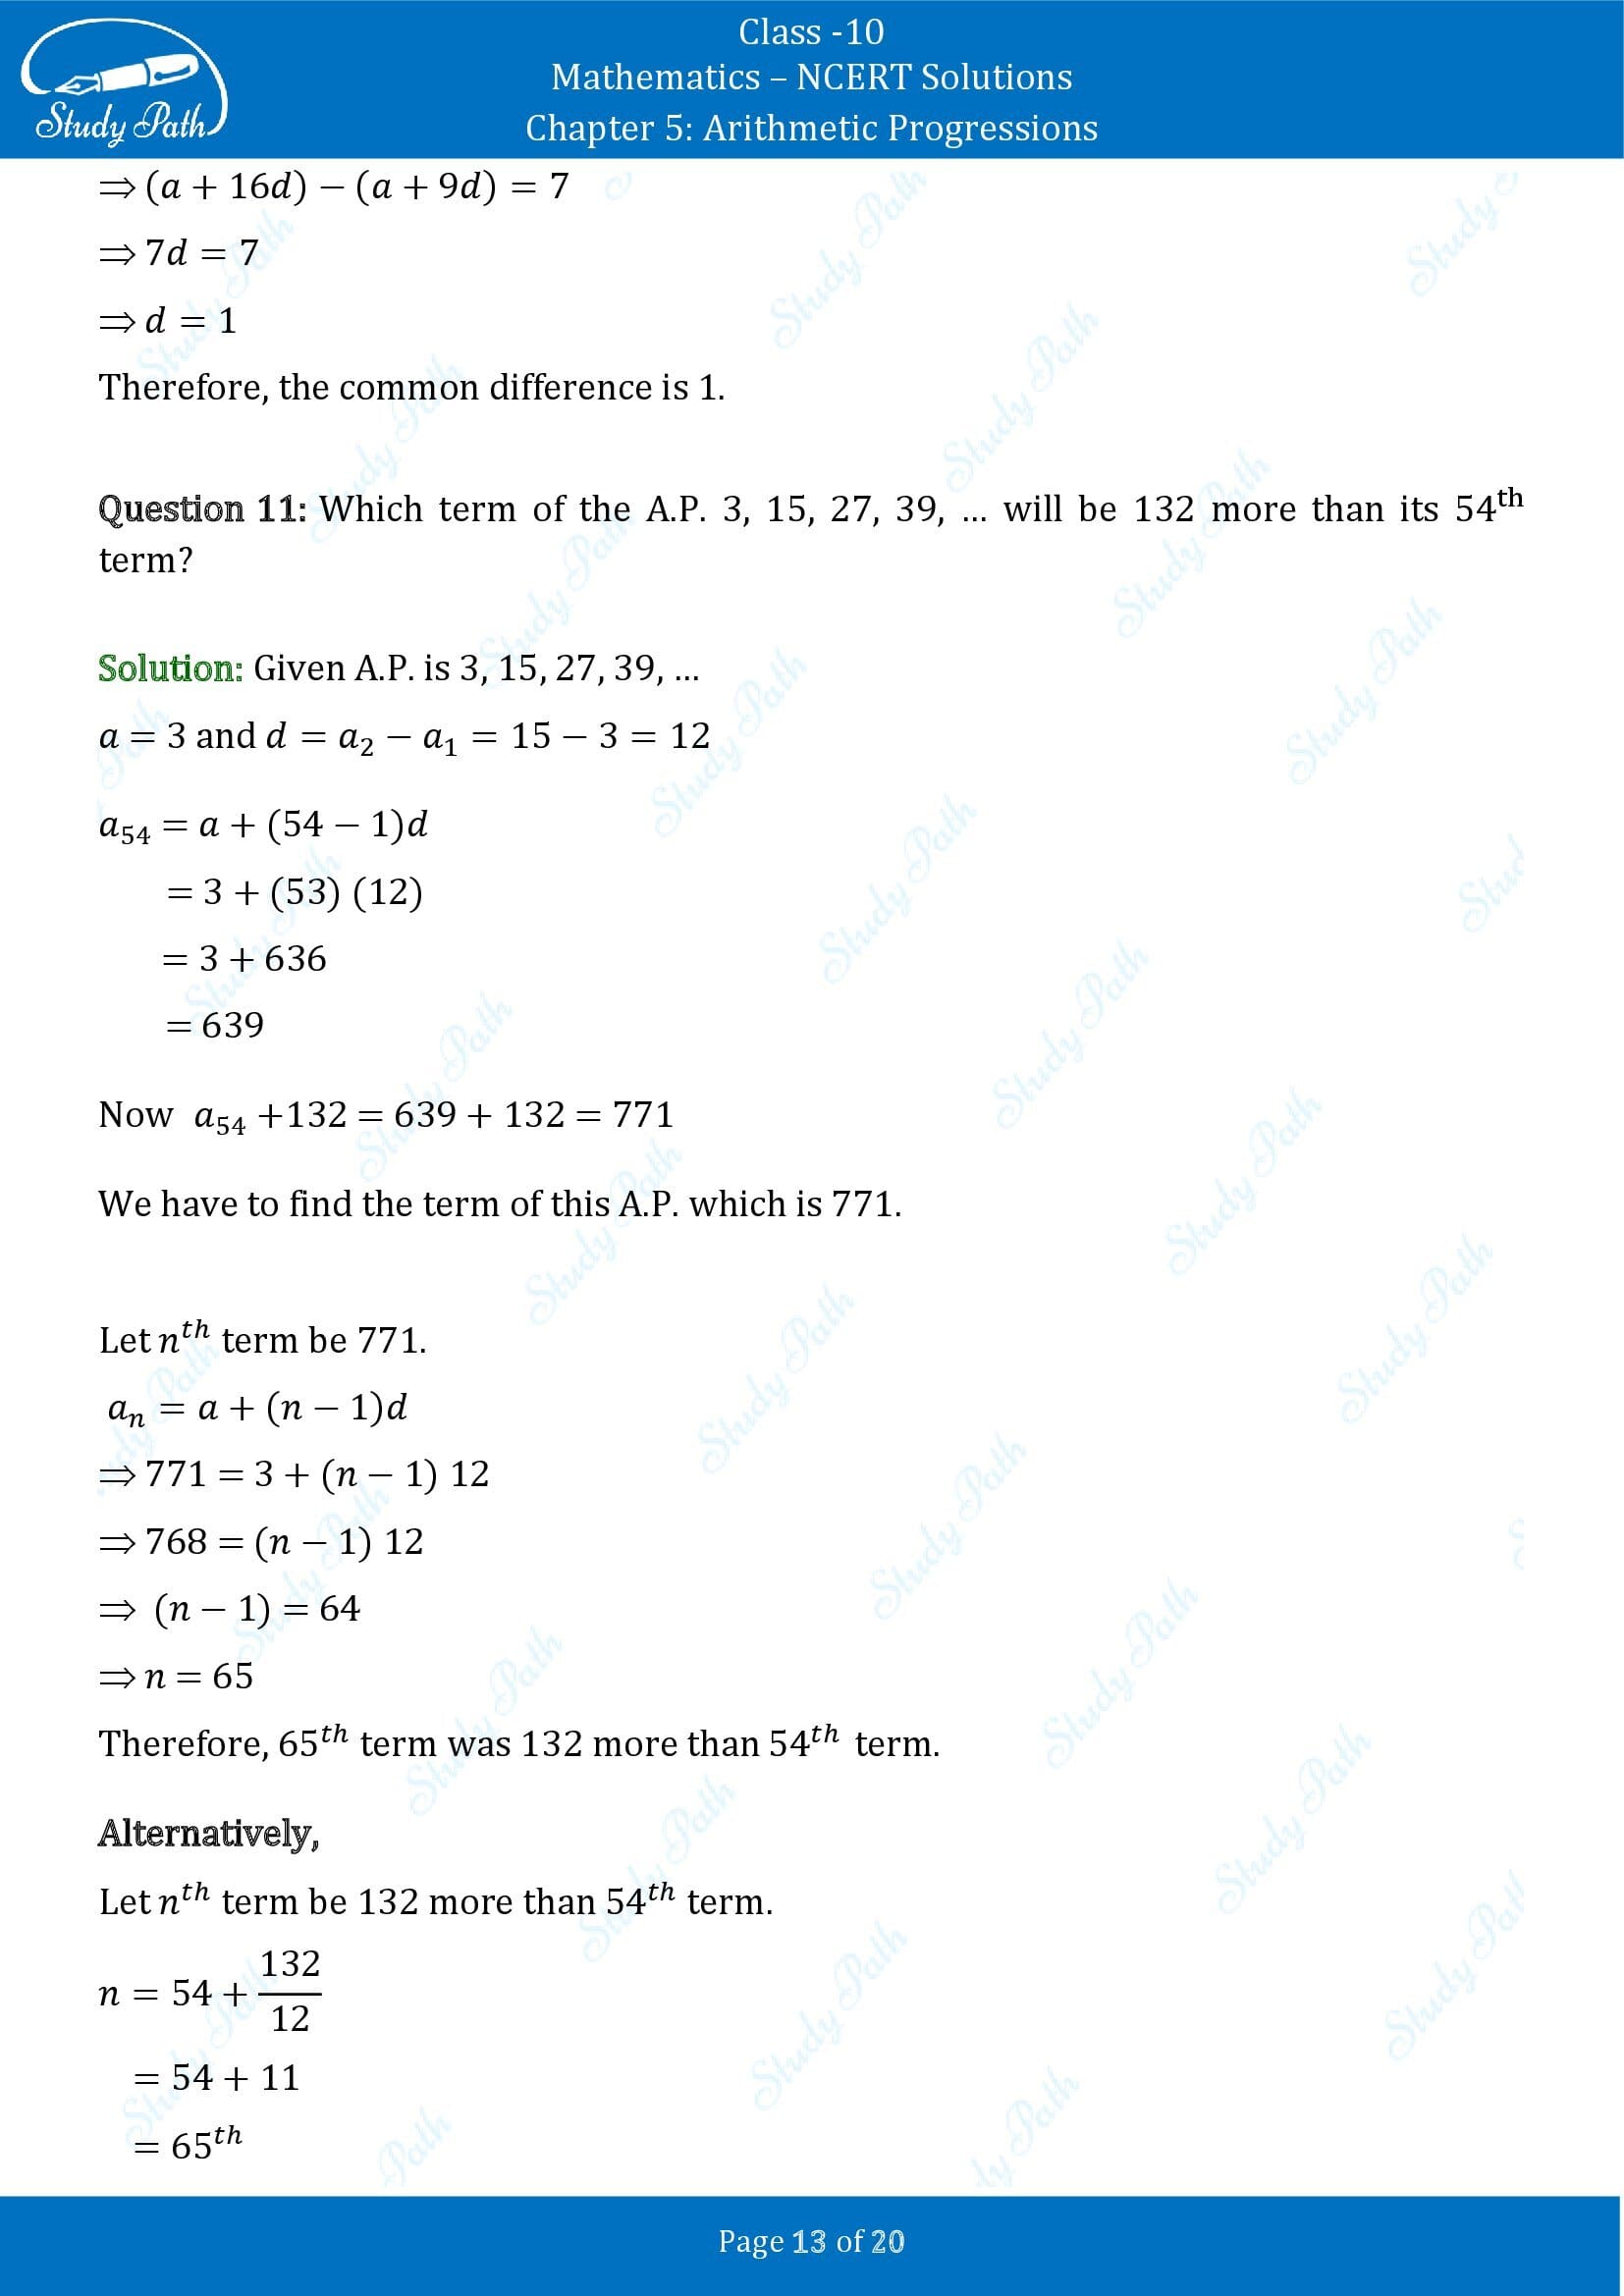 NCERT Solutions for Class 10 Maths Chapter 5 Arithmetic Progressions Exercise 5.2 00013